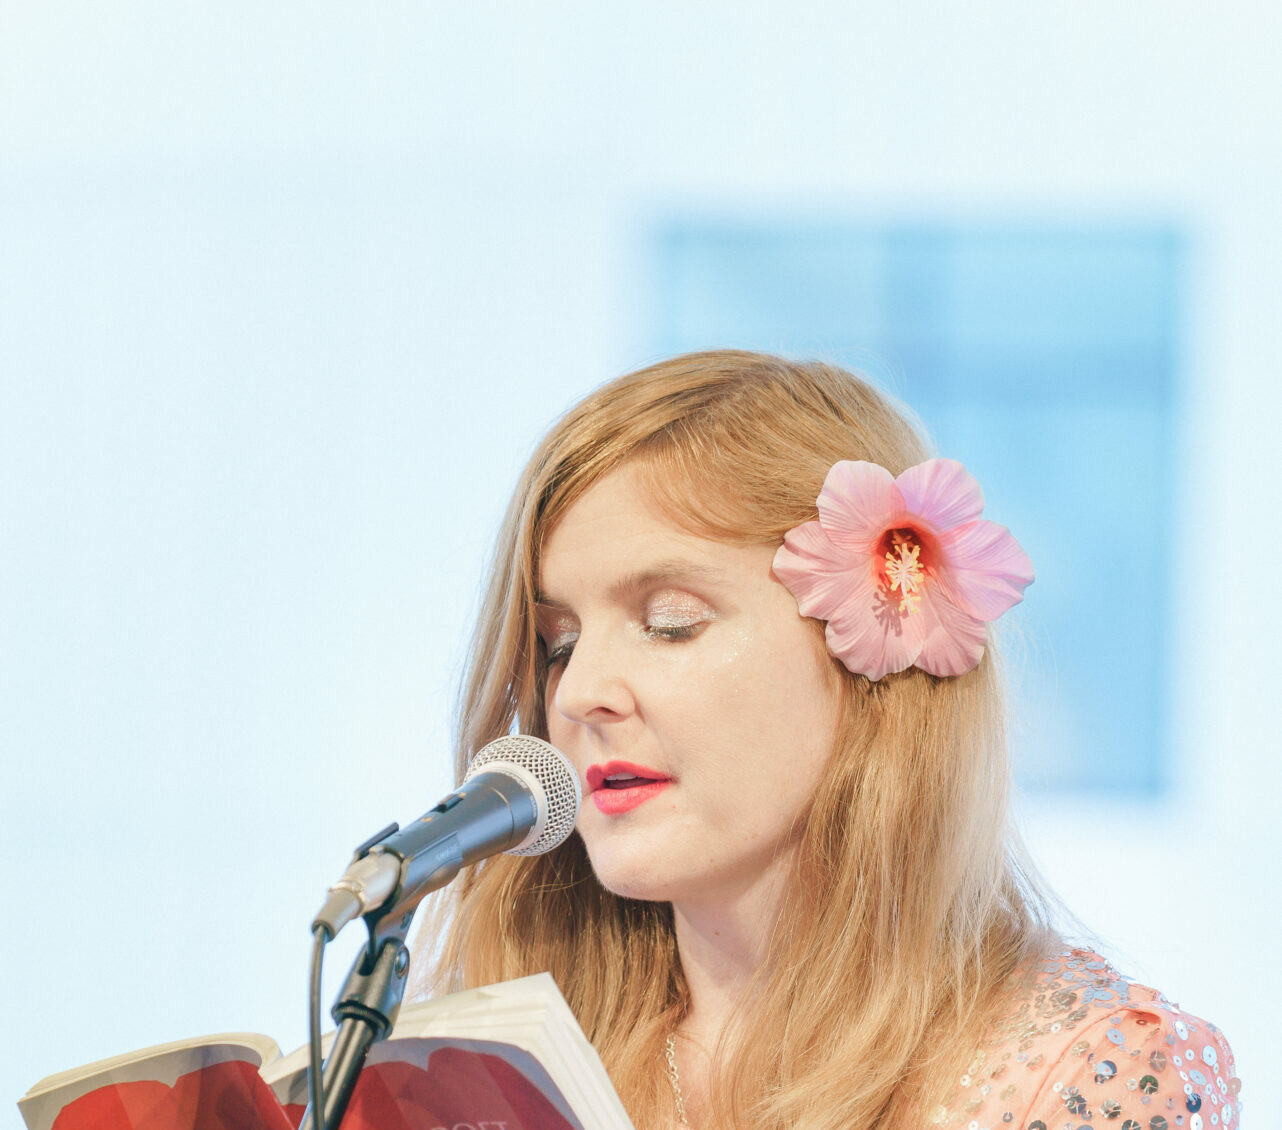 A blonde woman with a pink flower in her hair reads from a book at a microphone